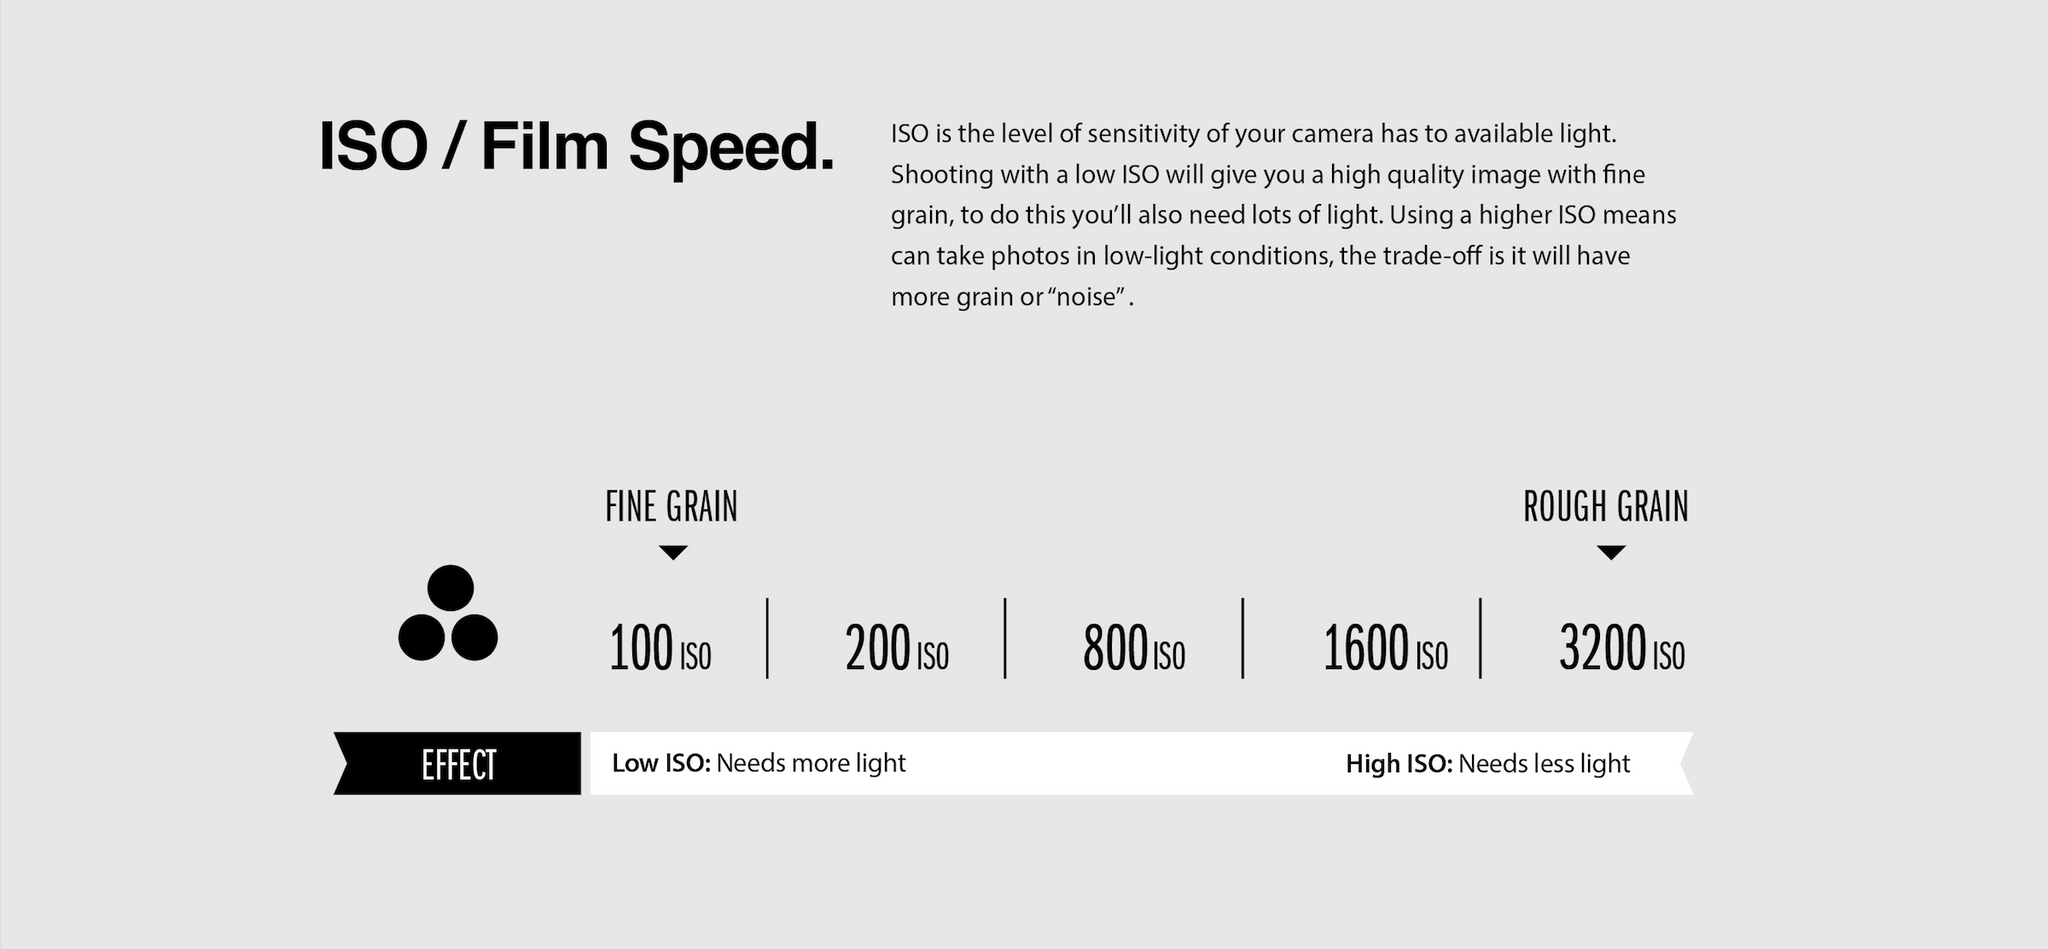 How ISO Film Speed works